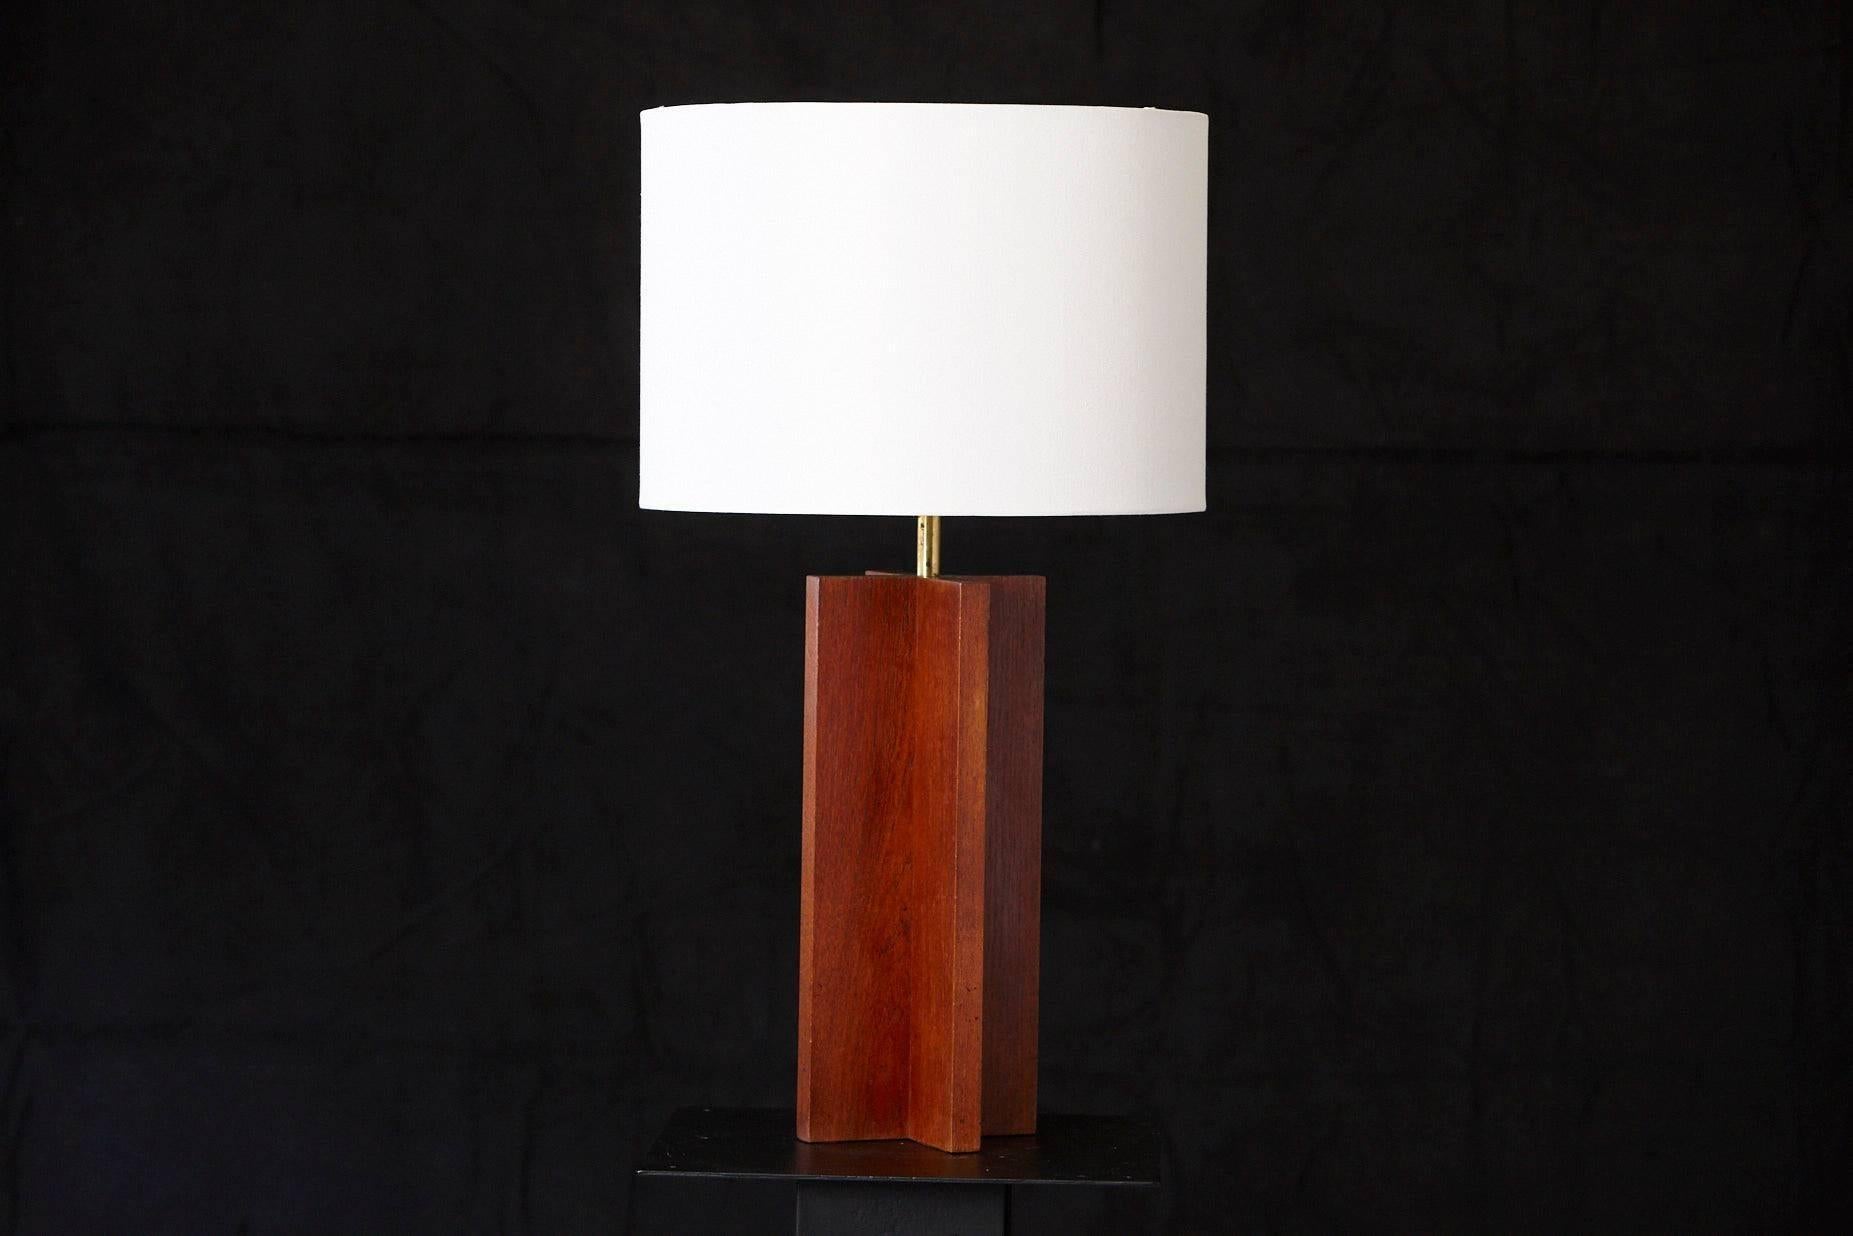 Minimalist and pure solid oak cruciform joint table lamp.
Measures: height to finial 33 in.